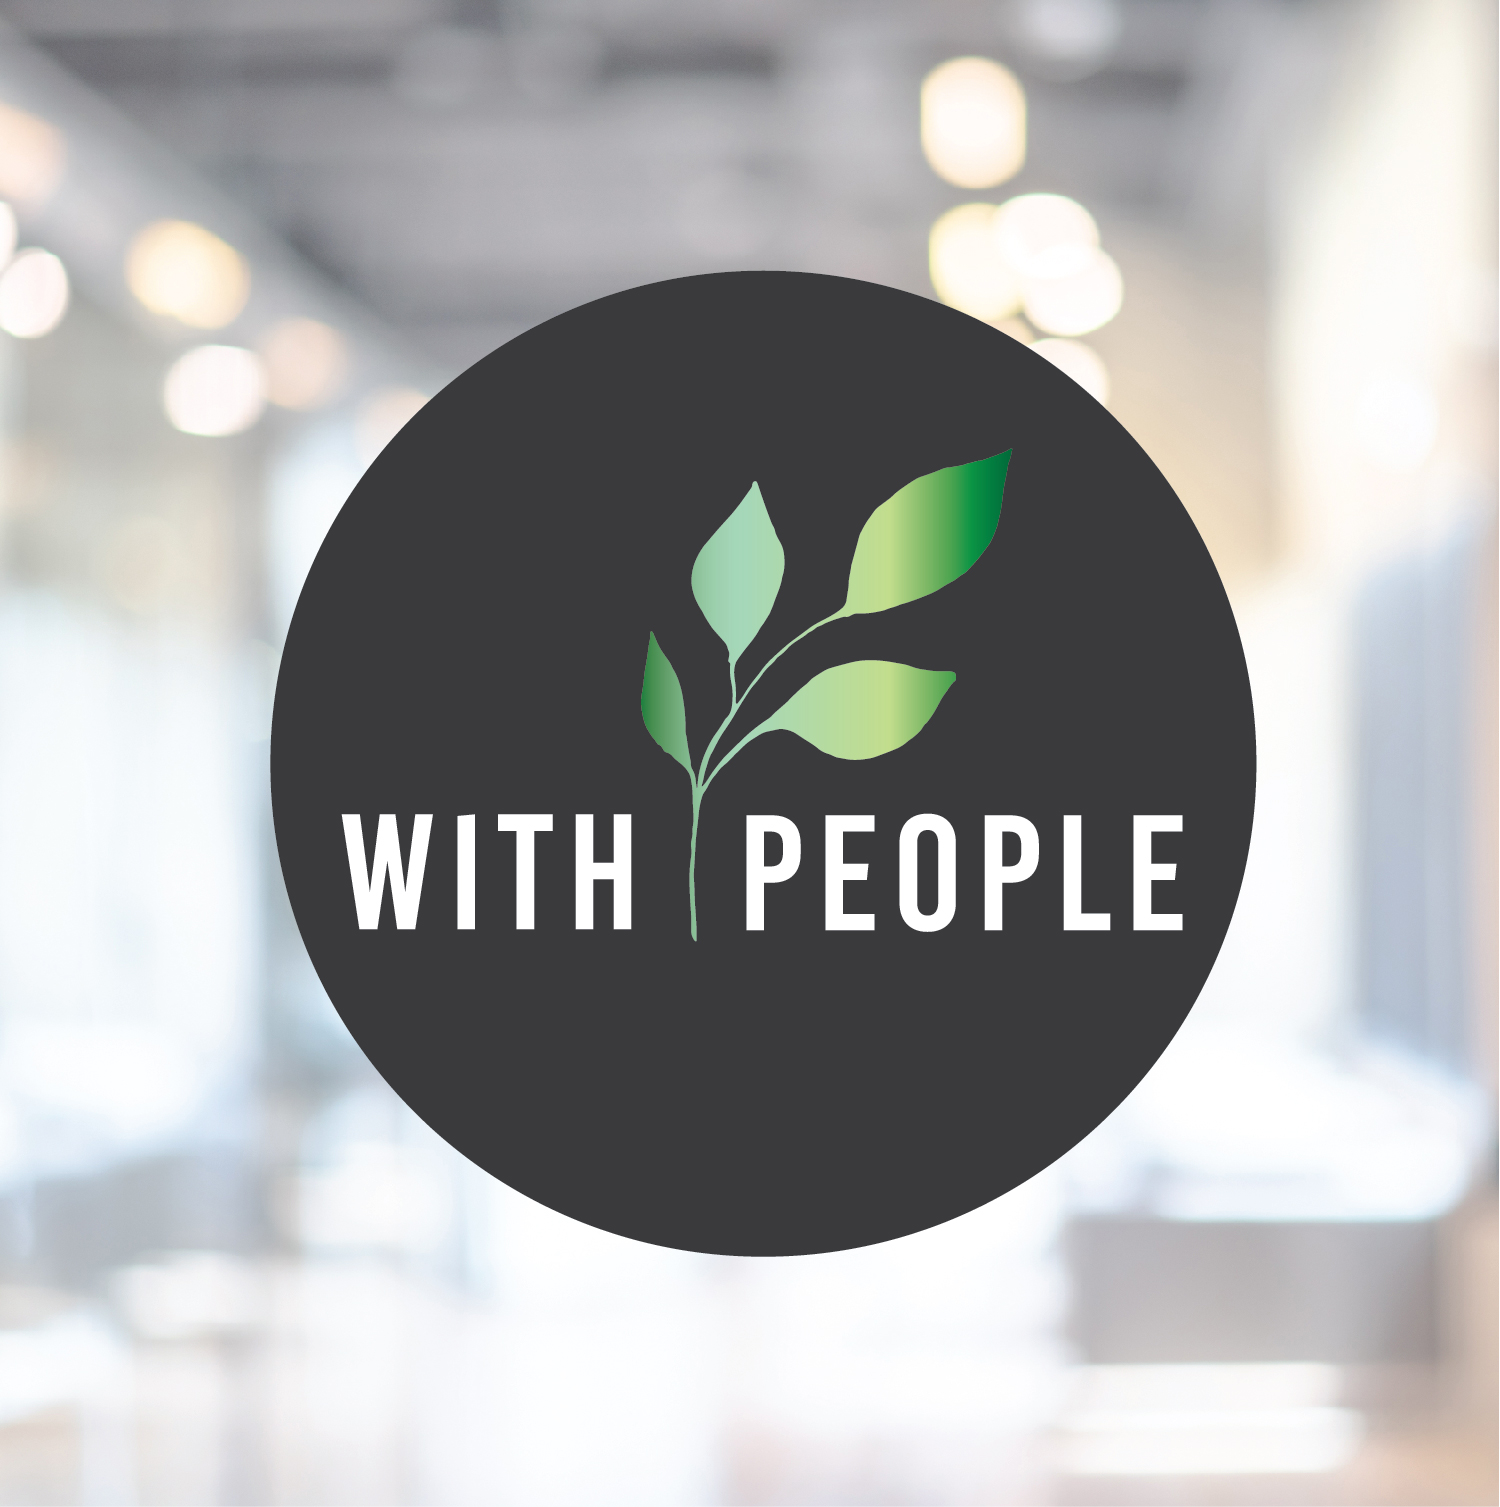 WITH PEOPLE by bl3nd design graphic design agency in abbotsford british columbia canada